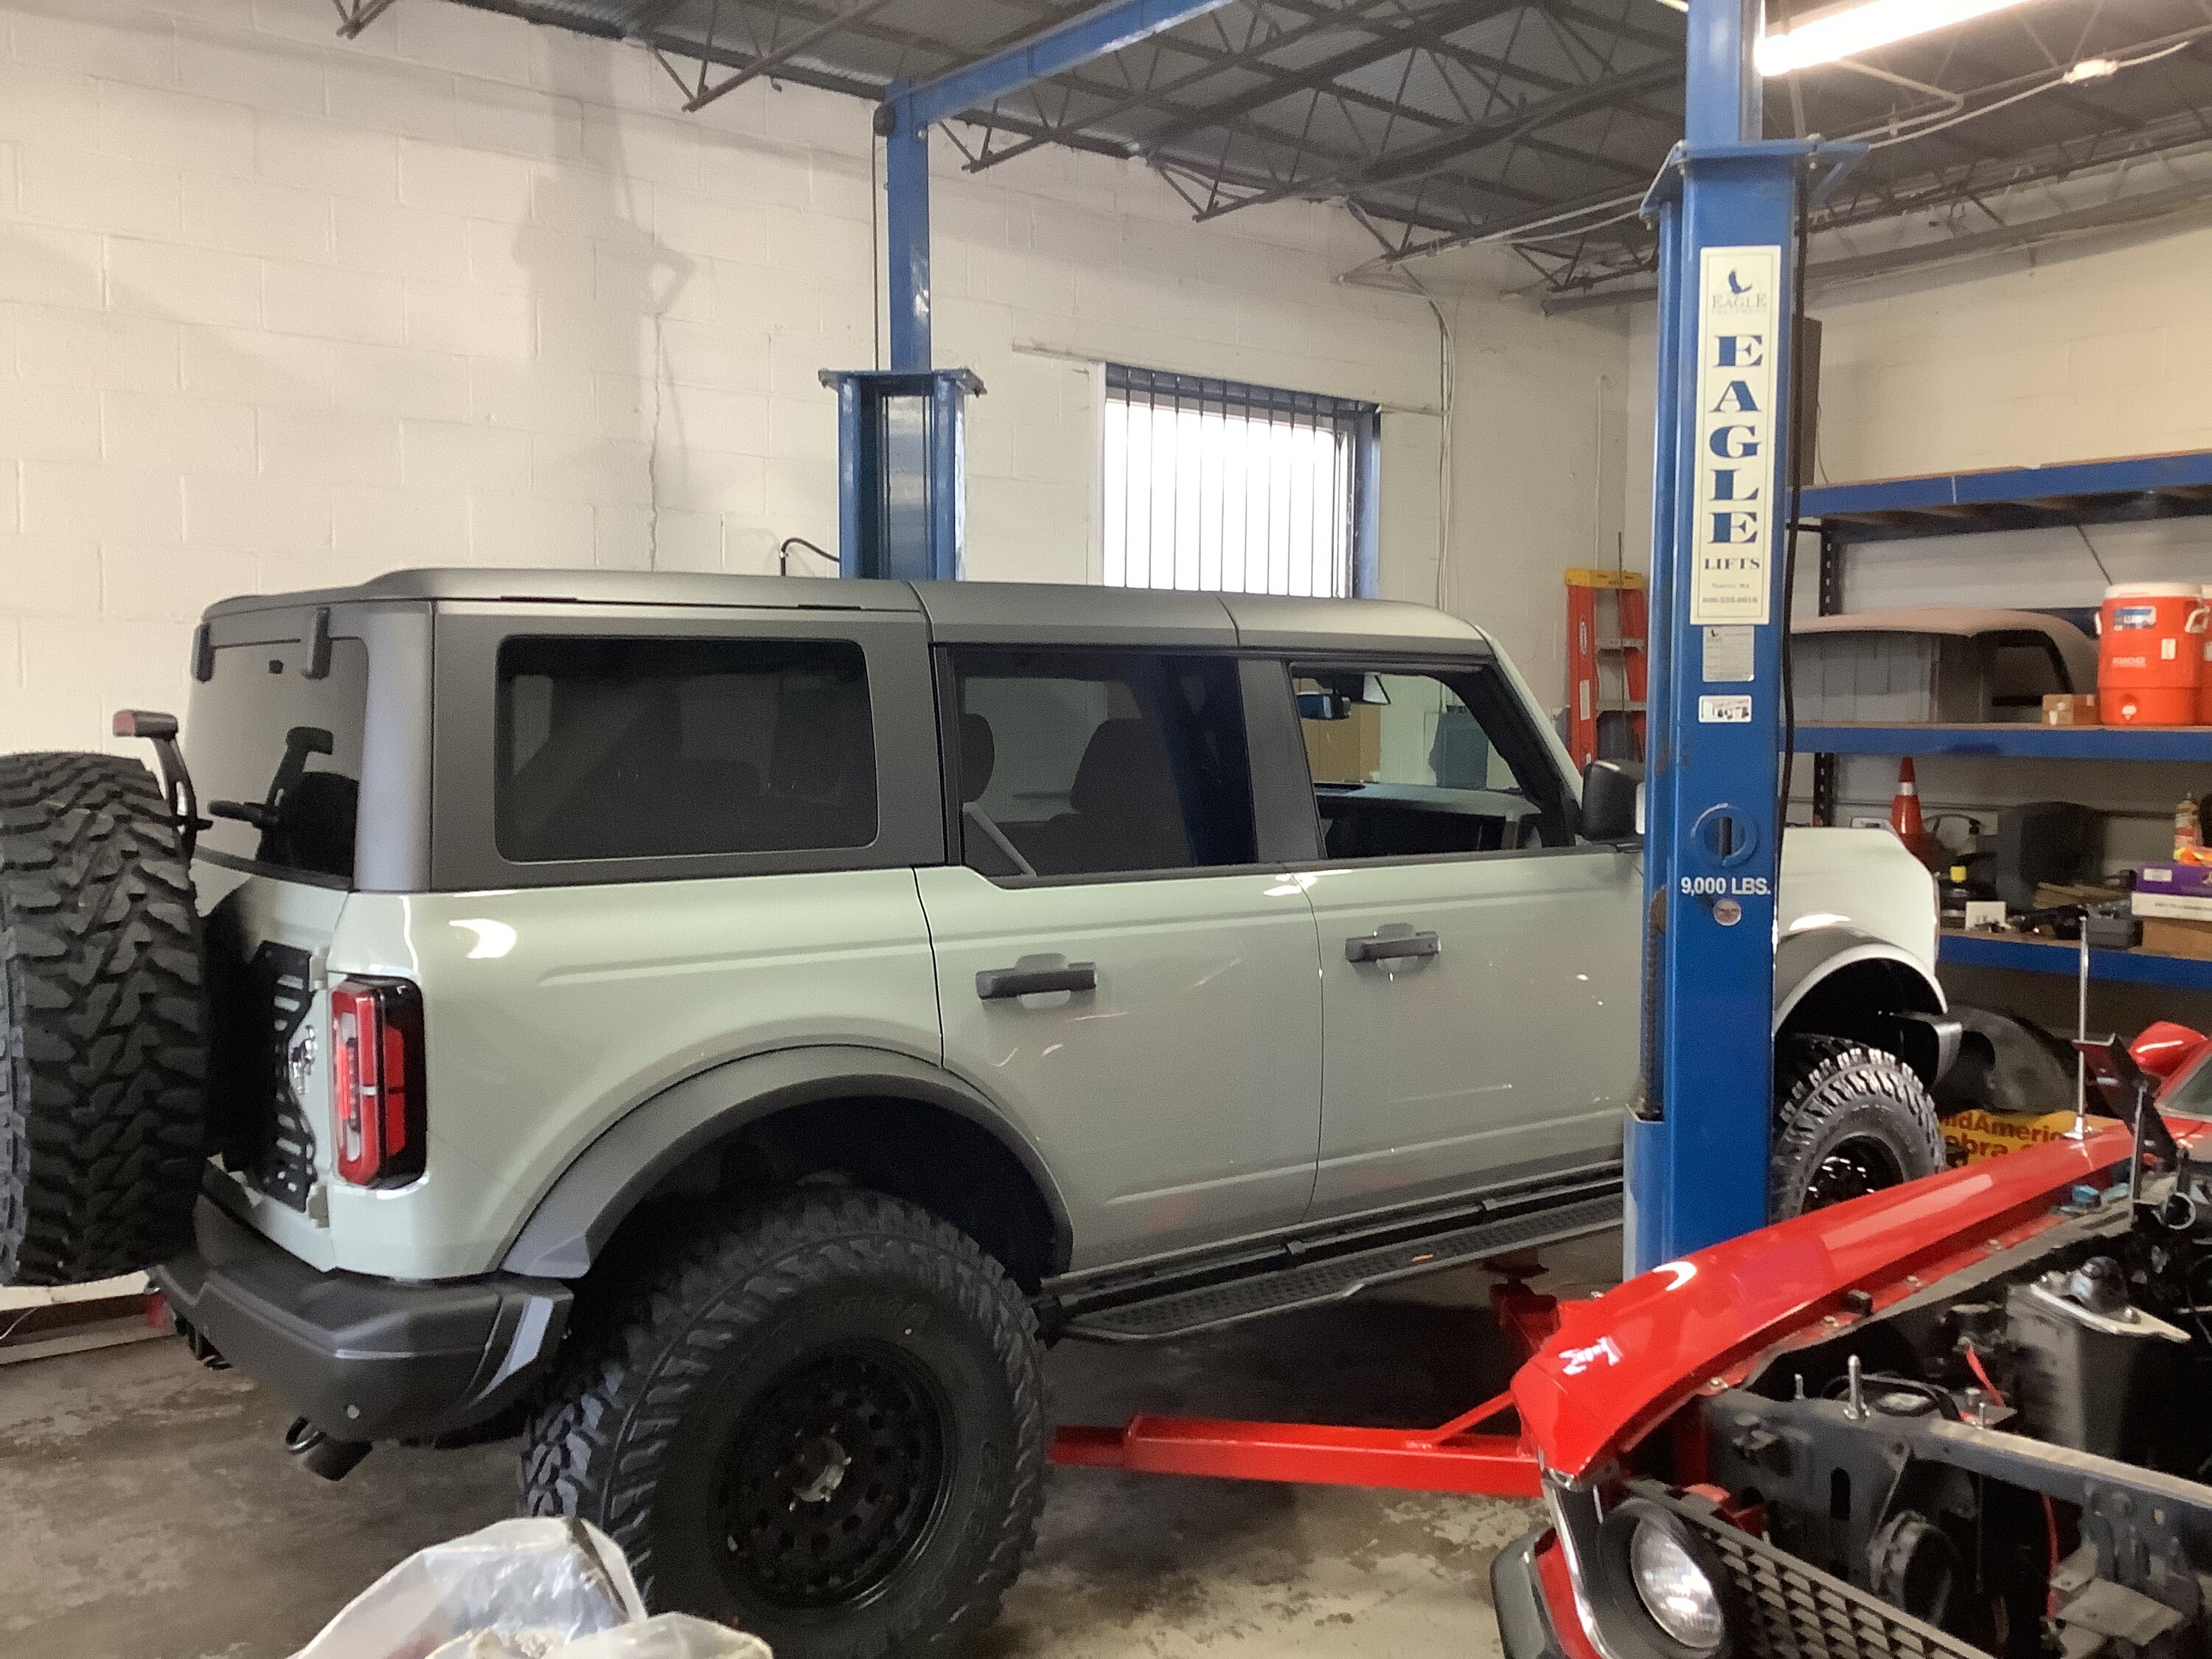 Ford Bronco Asking what's been asked before, what do I need for 35's/37's 69E6C4DE-BBBF-4791-A237-FA16D520D2B9